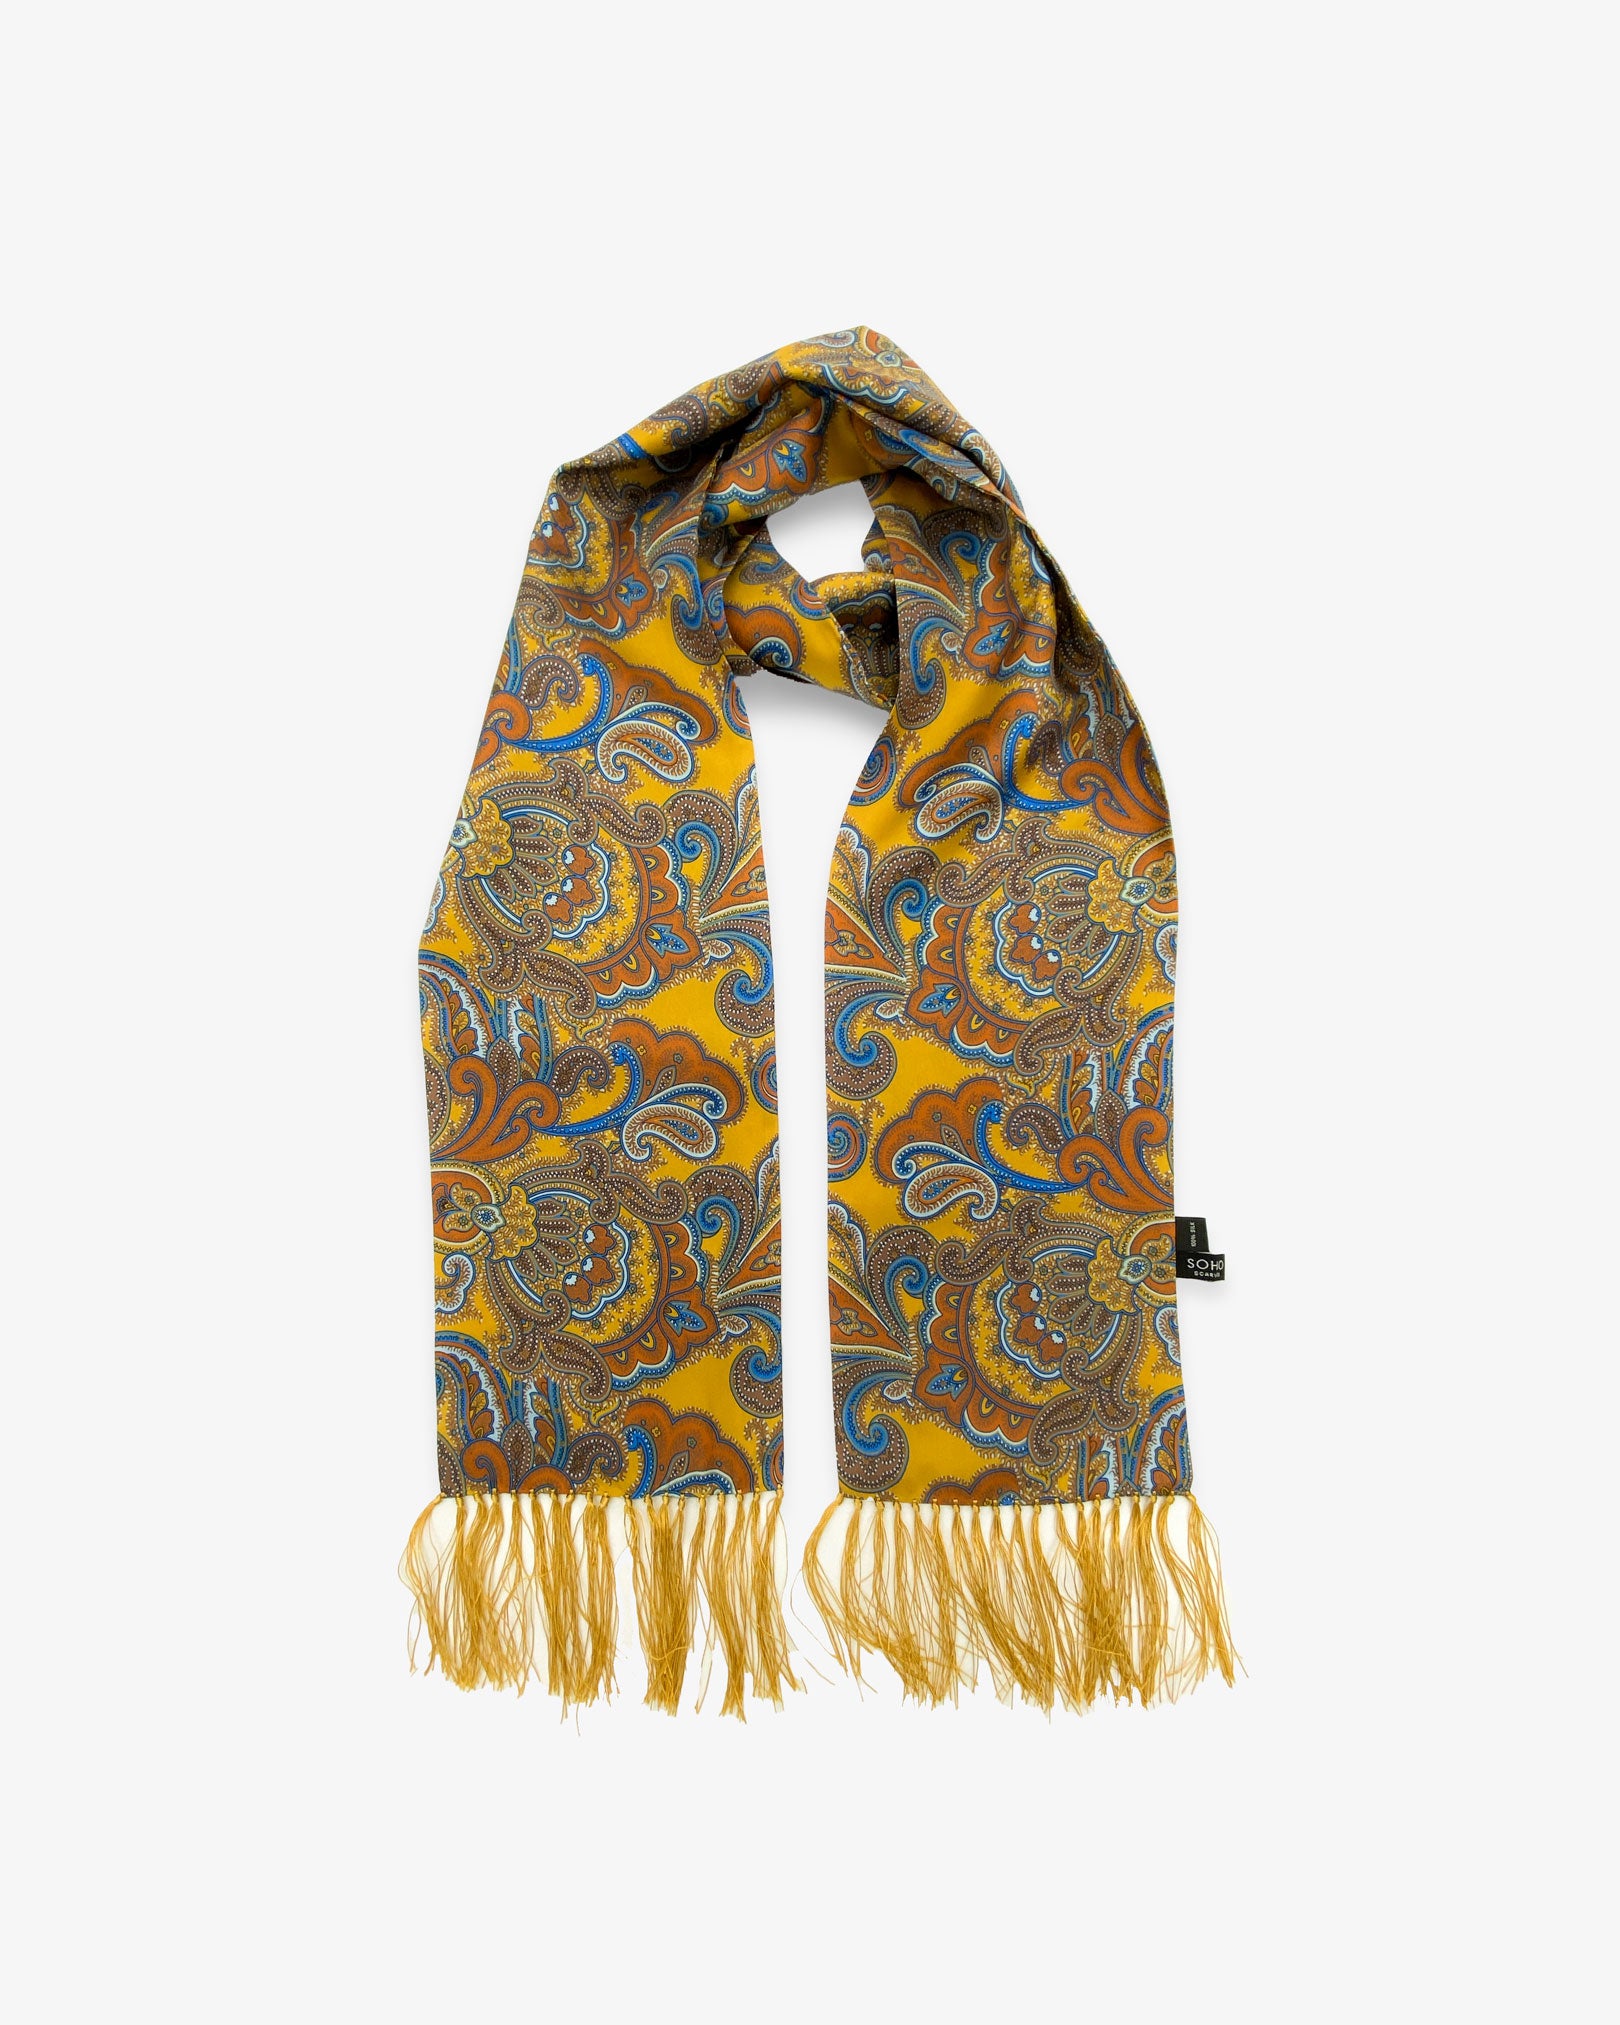 Looped view of the 'Carnaby' silk aviator scarf, clearly showing the golden yellow fabric with vibrant orange, brown and blue paisley patterns and a matching 3-inch fringe.